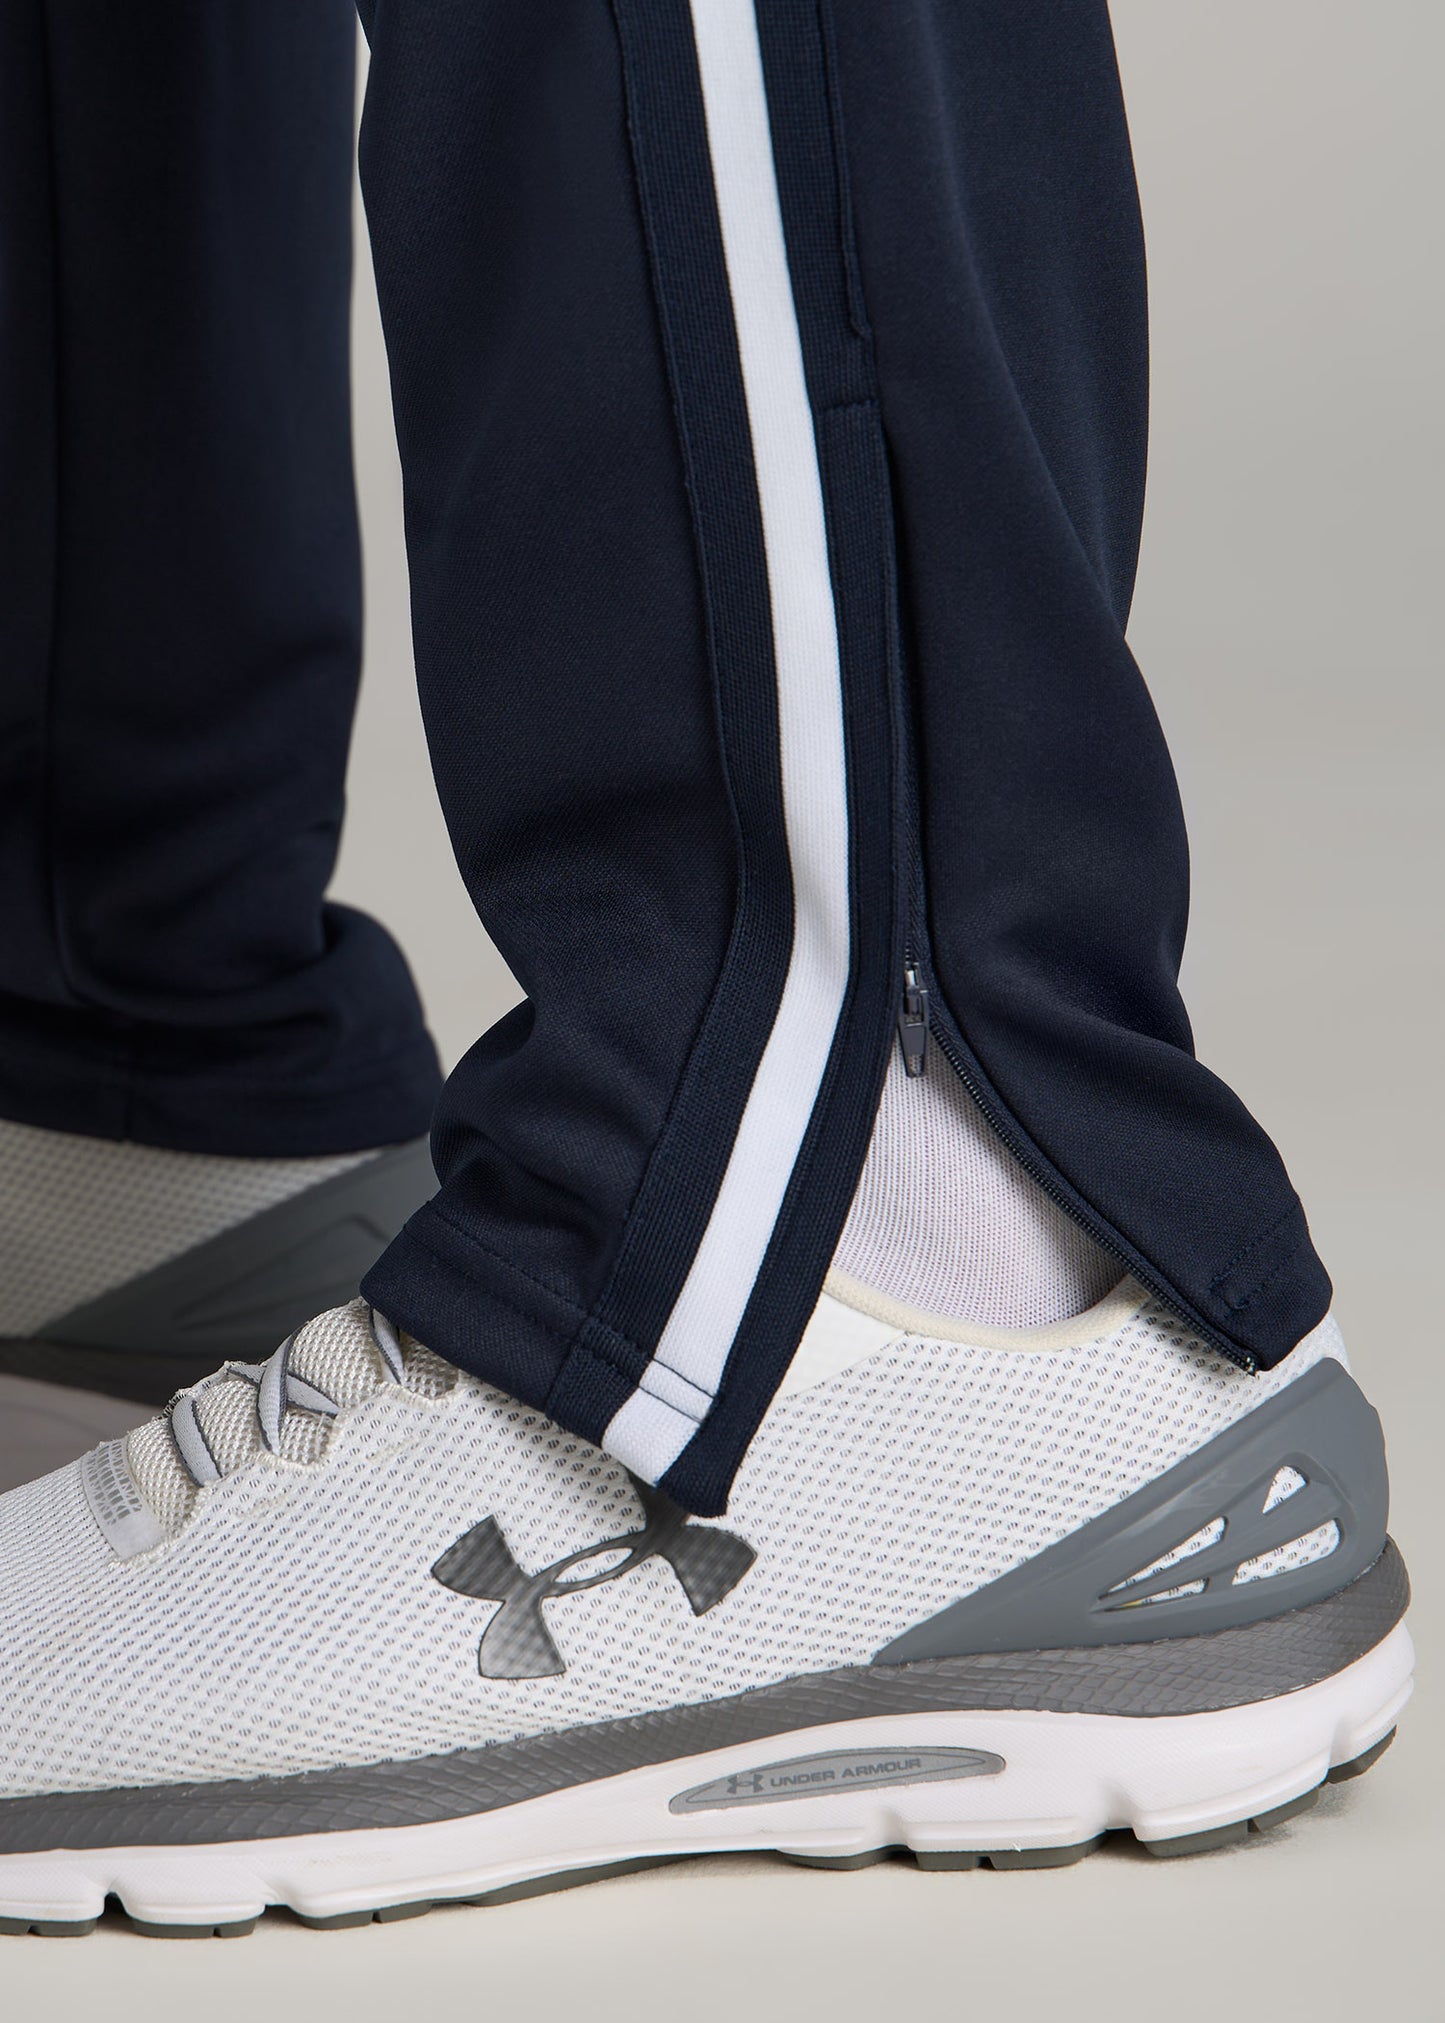 Athletic Stripe Pants for Tall Men in Navy